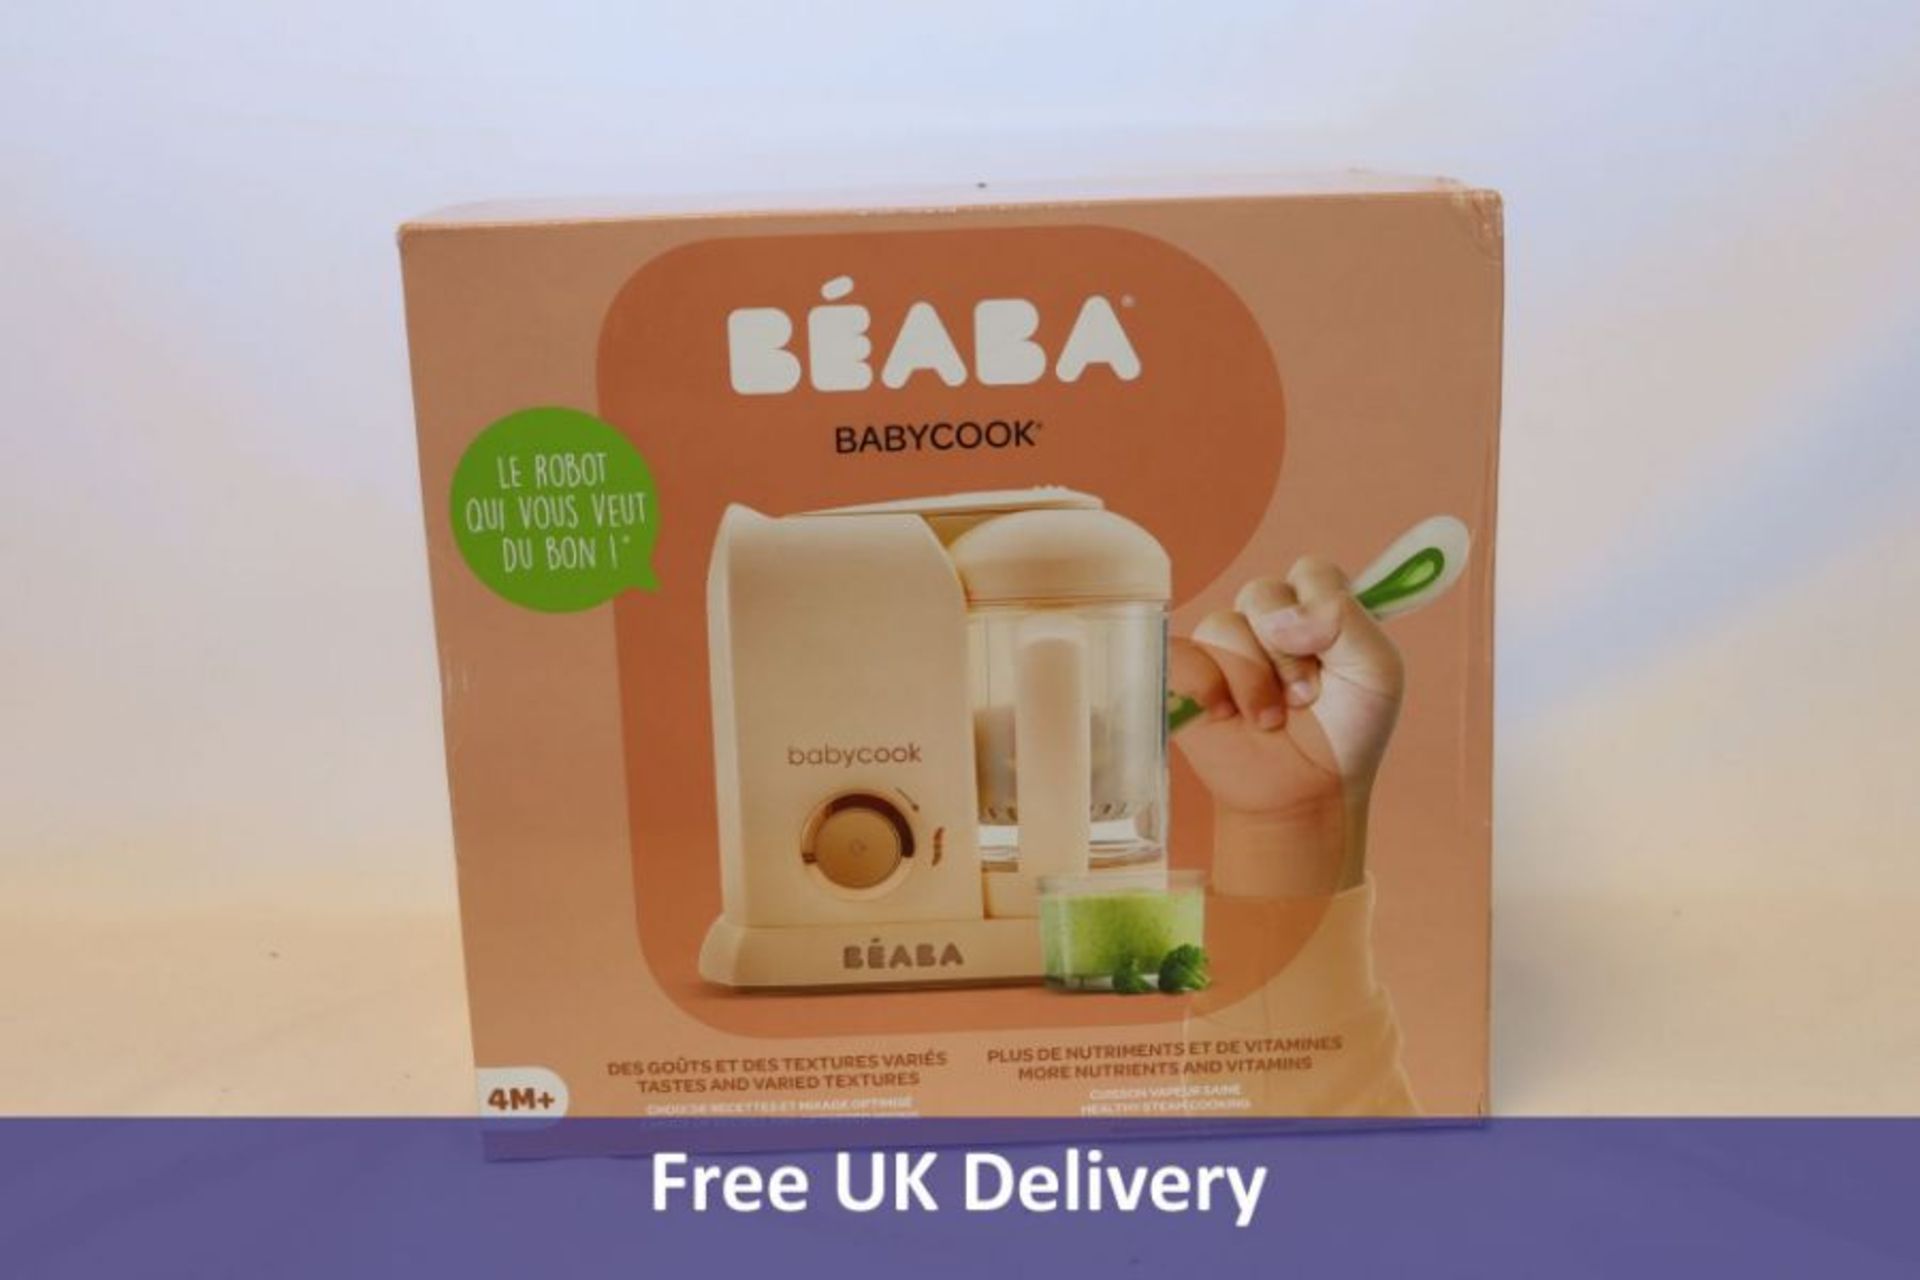 BEABA Babycook Solo 4 in 1 Baby Food Processor, Blender and Cooker, Pink. Box damaged